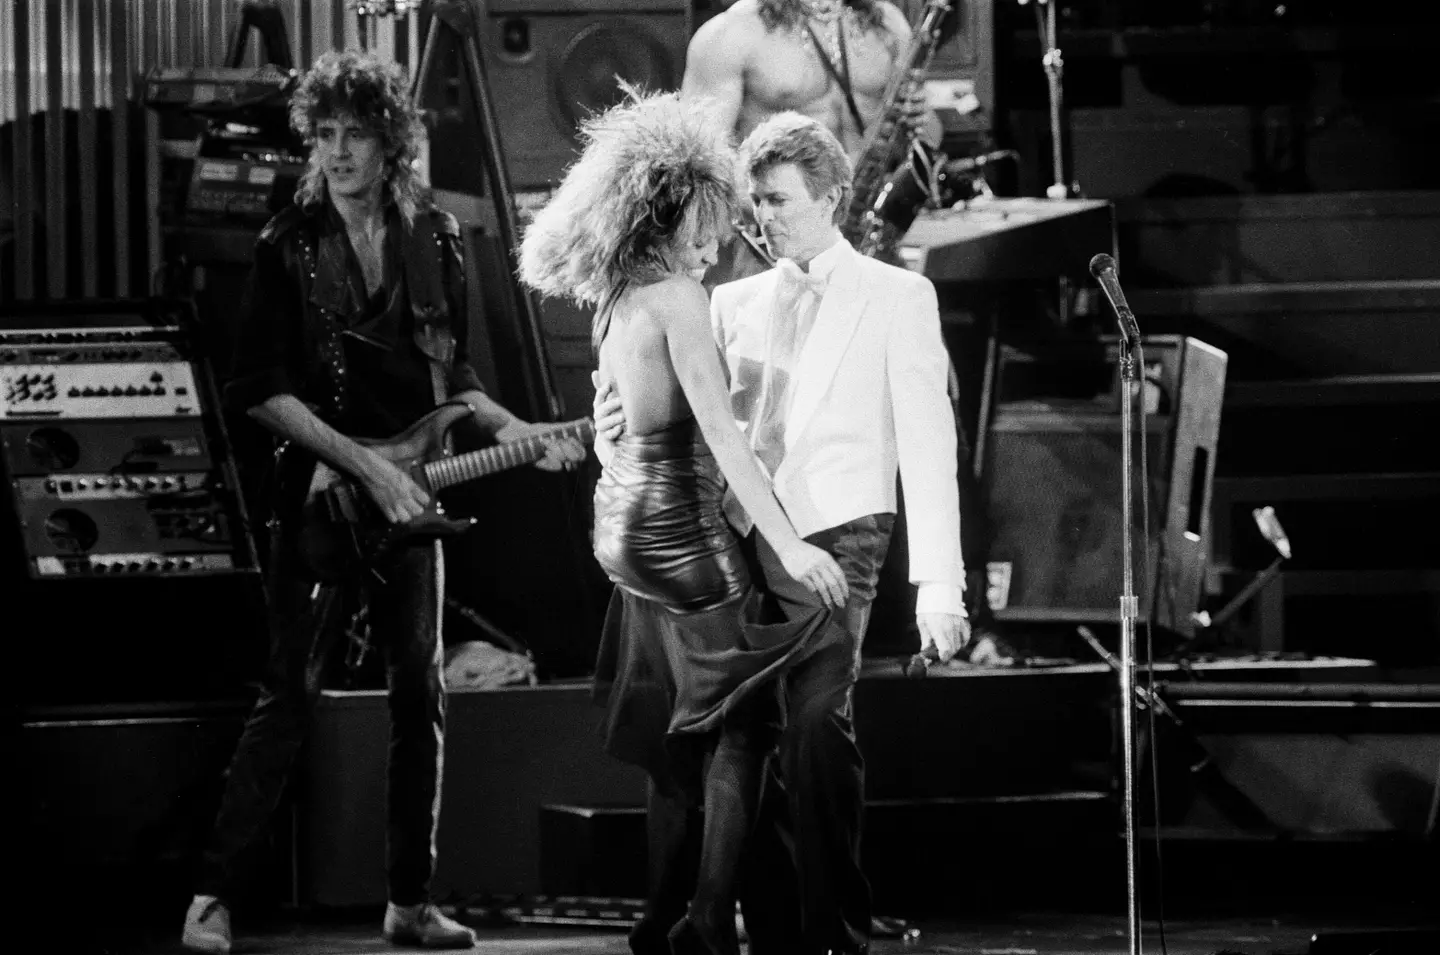 David Bowie once serenaded Tina Turner in the most hilarious way.